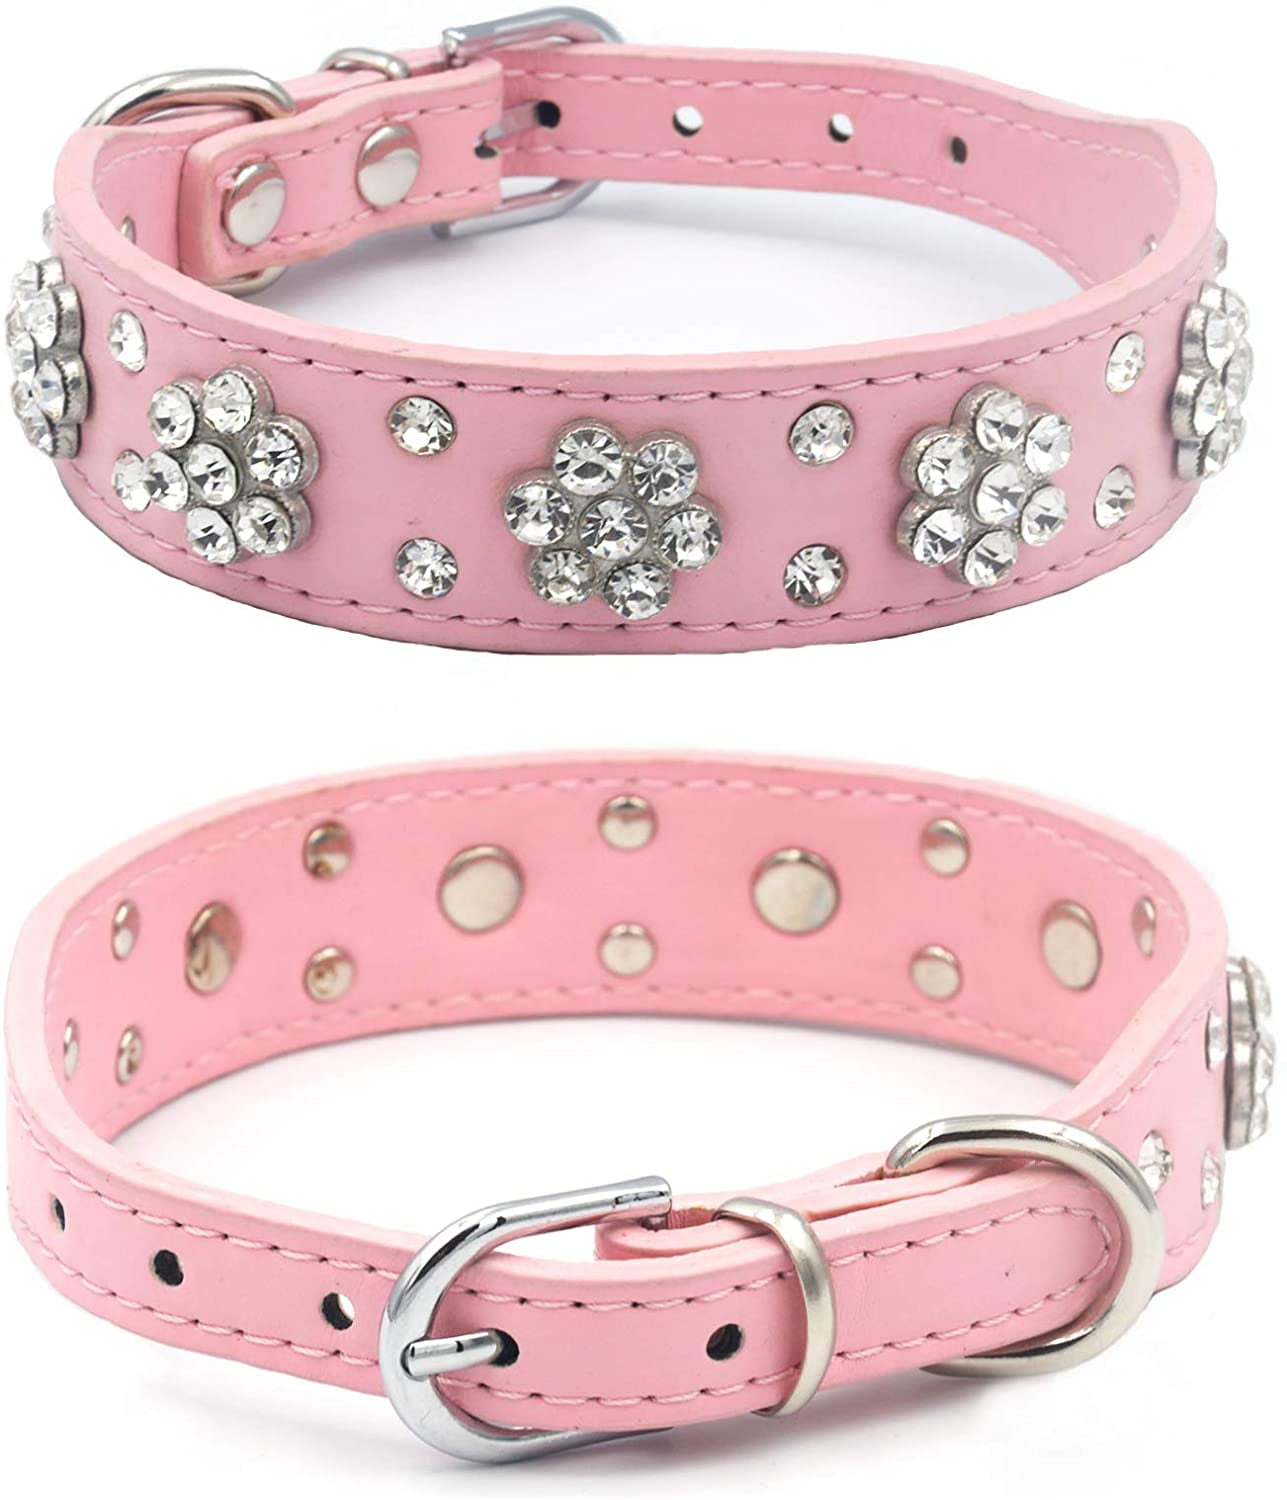 PU Leather Dog Collars for Small Dogs Adjustable Small Pet Dog Collar with Rhinestone Female Dog Collar Personalized 